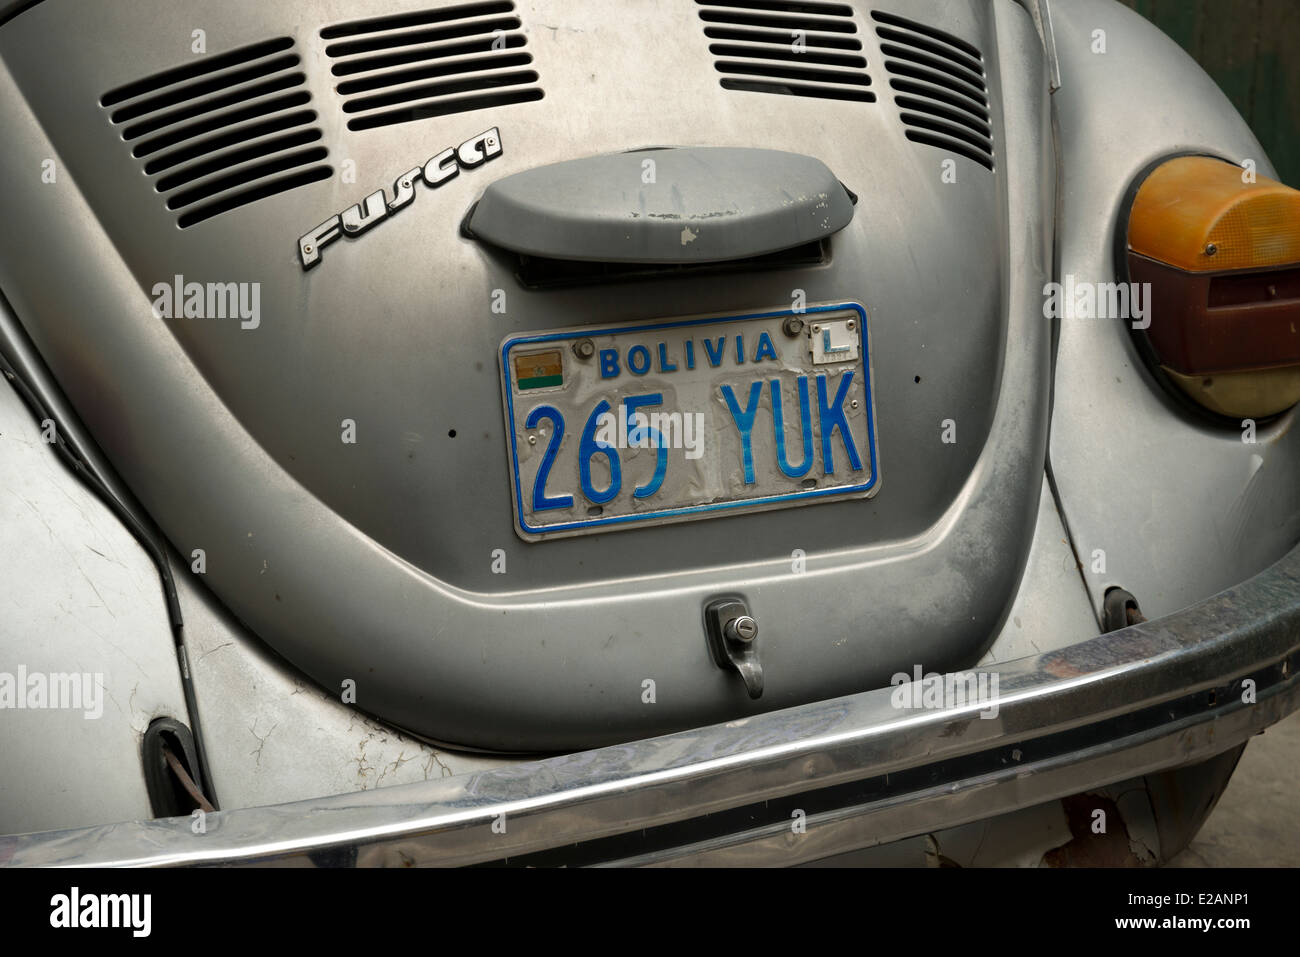 Old Volkswagen Beetle (Bug) with a Bolivian number plate 265 YUK Stock Photo